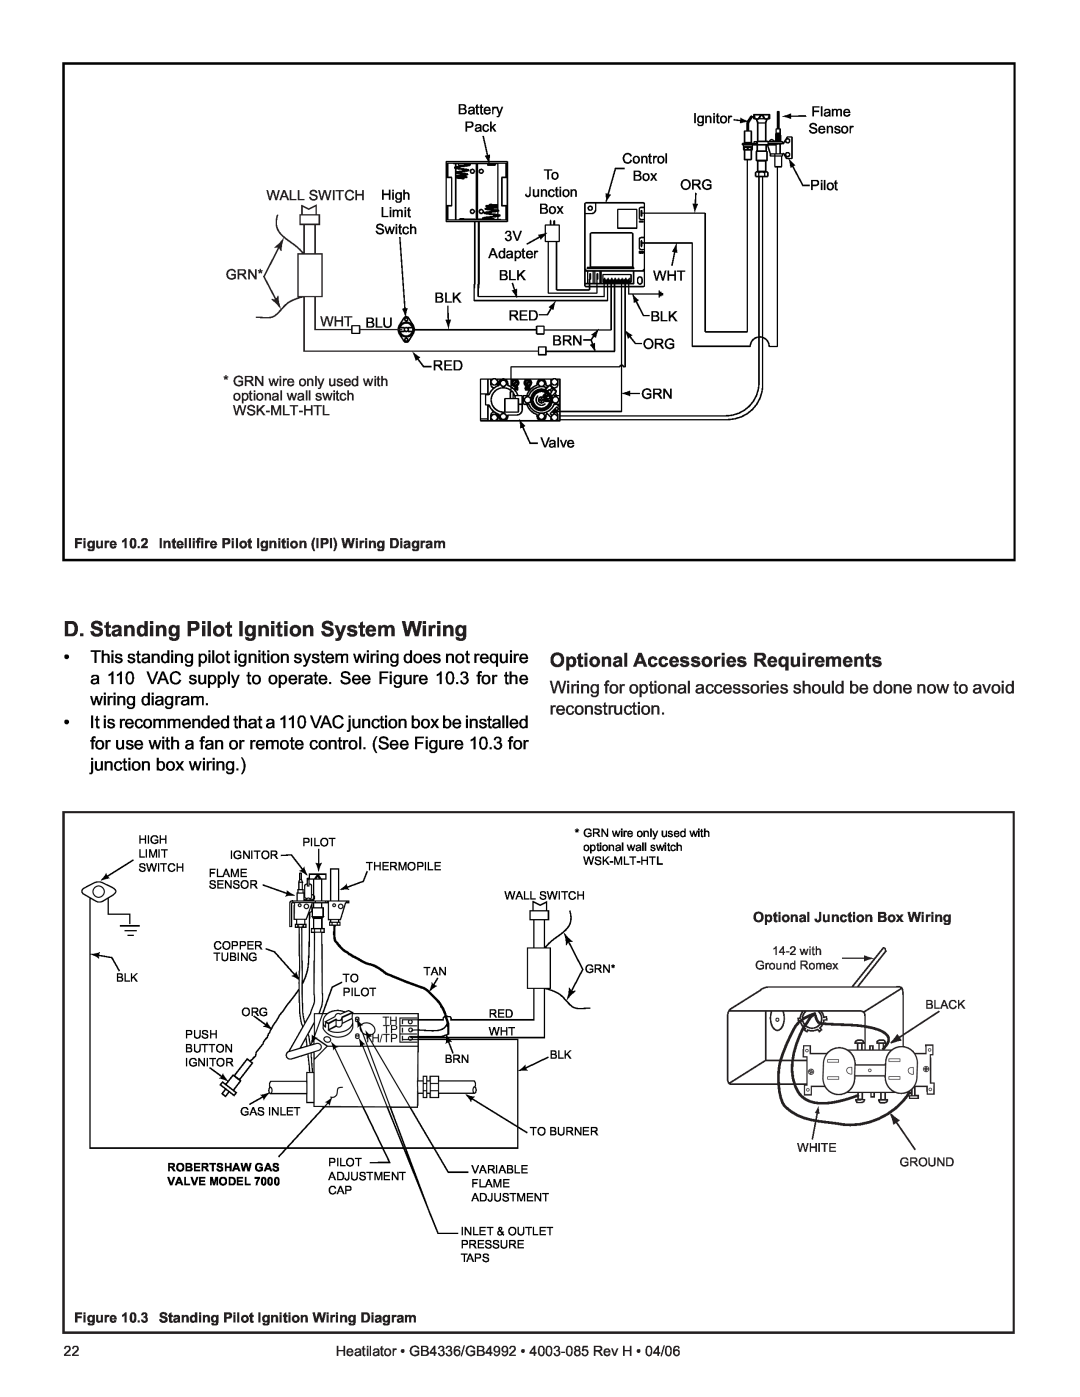 Heatiator GB4336 D. Standing Pilot Ignition System Wiring, Optional Accessories Requirements, Optional Junction Box Wiring 